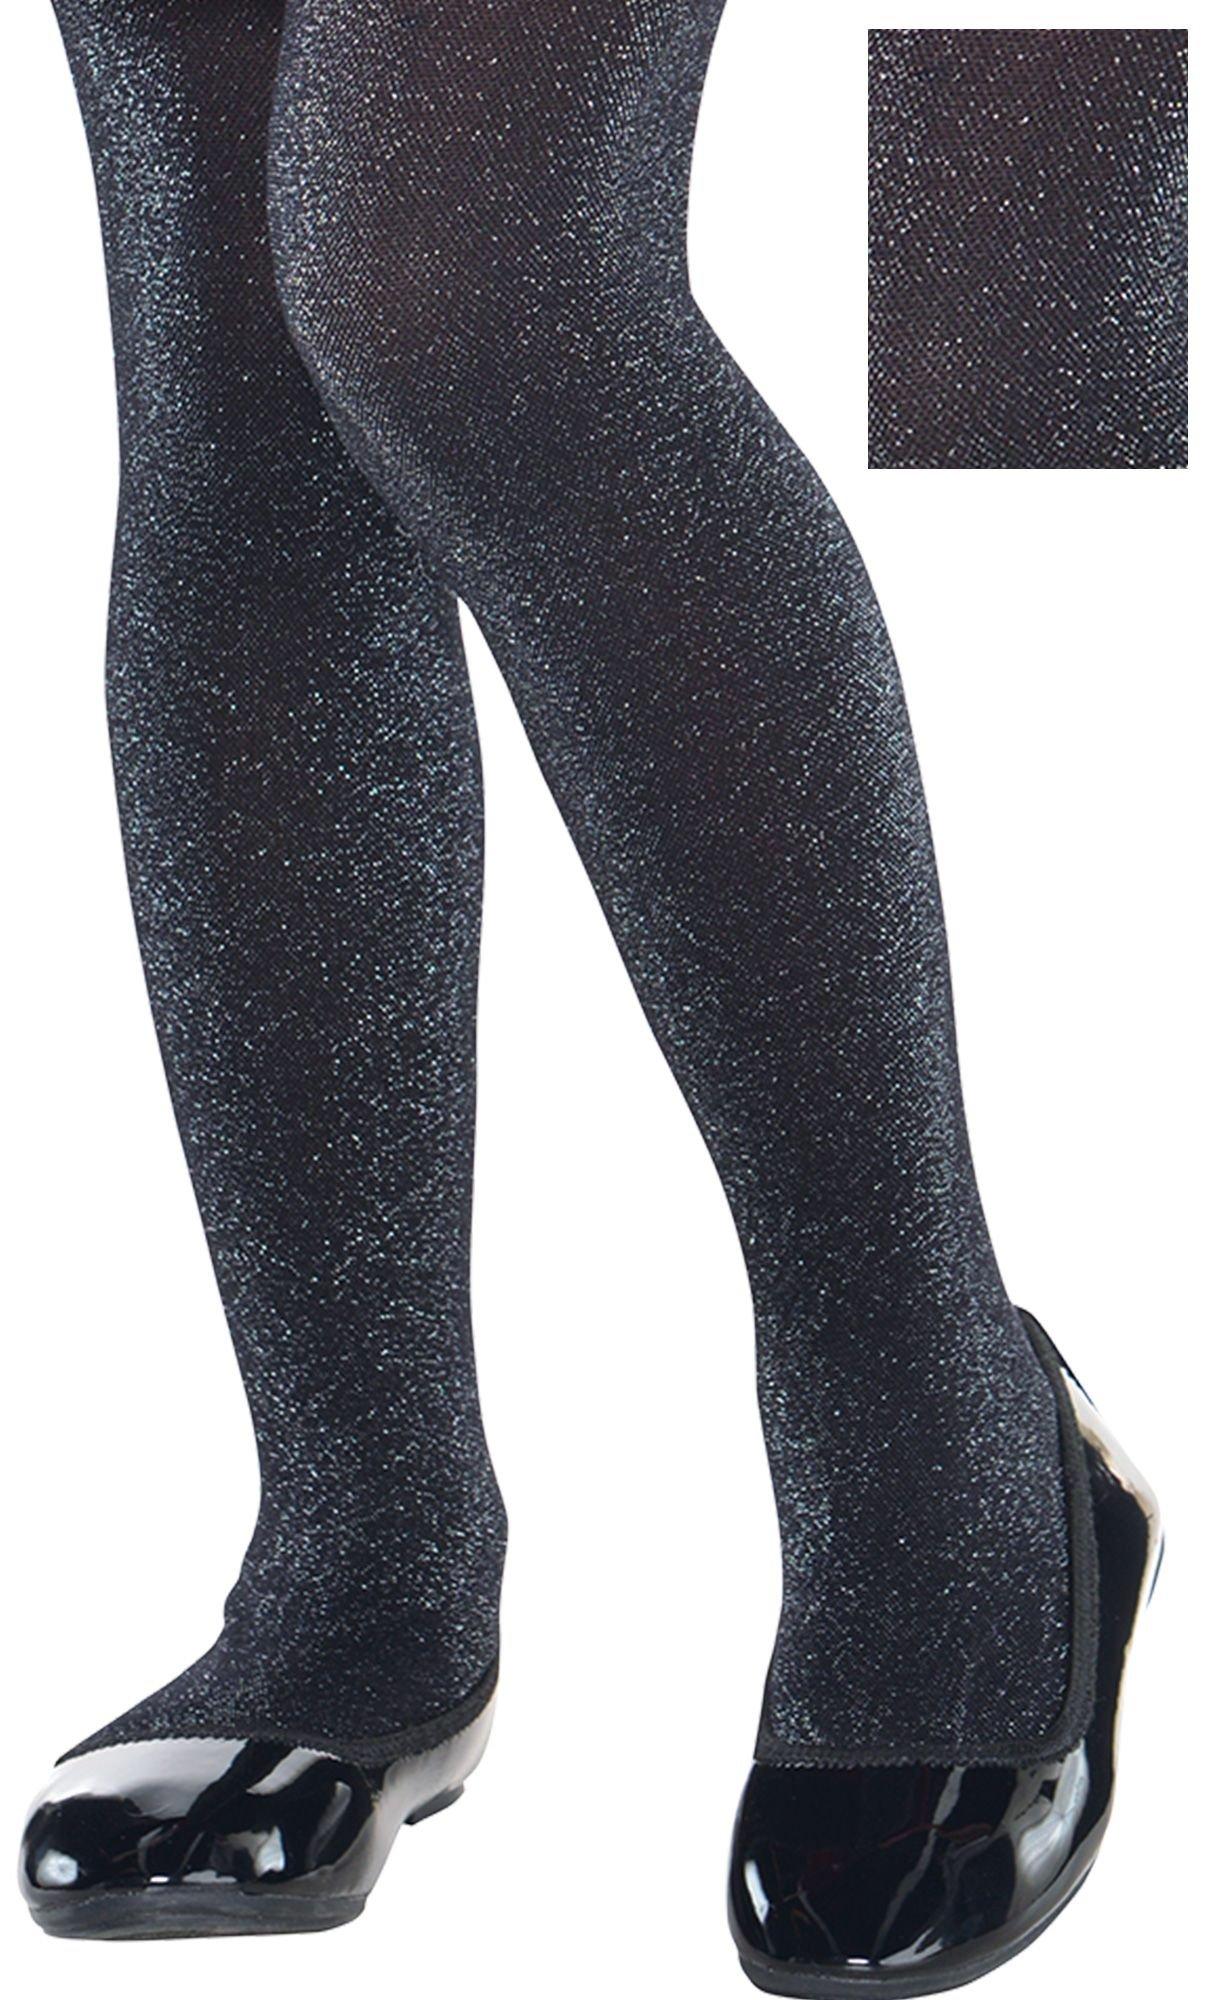 GLITTER SHIMMER TIGHTS, Black With Silver Sparkle, Panyhose